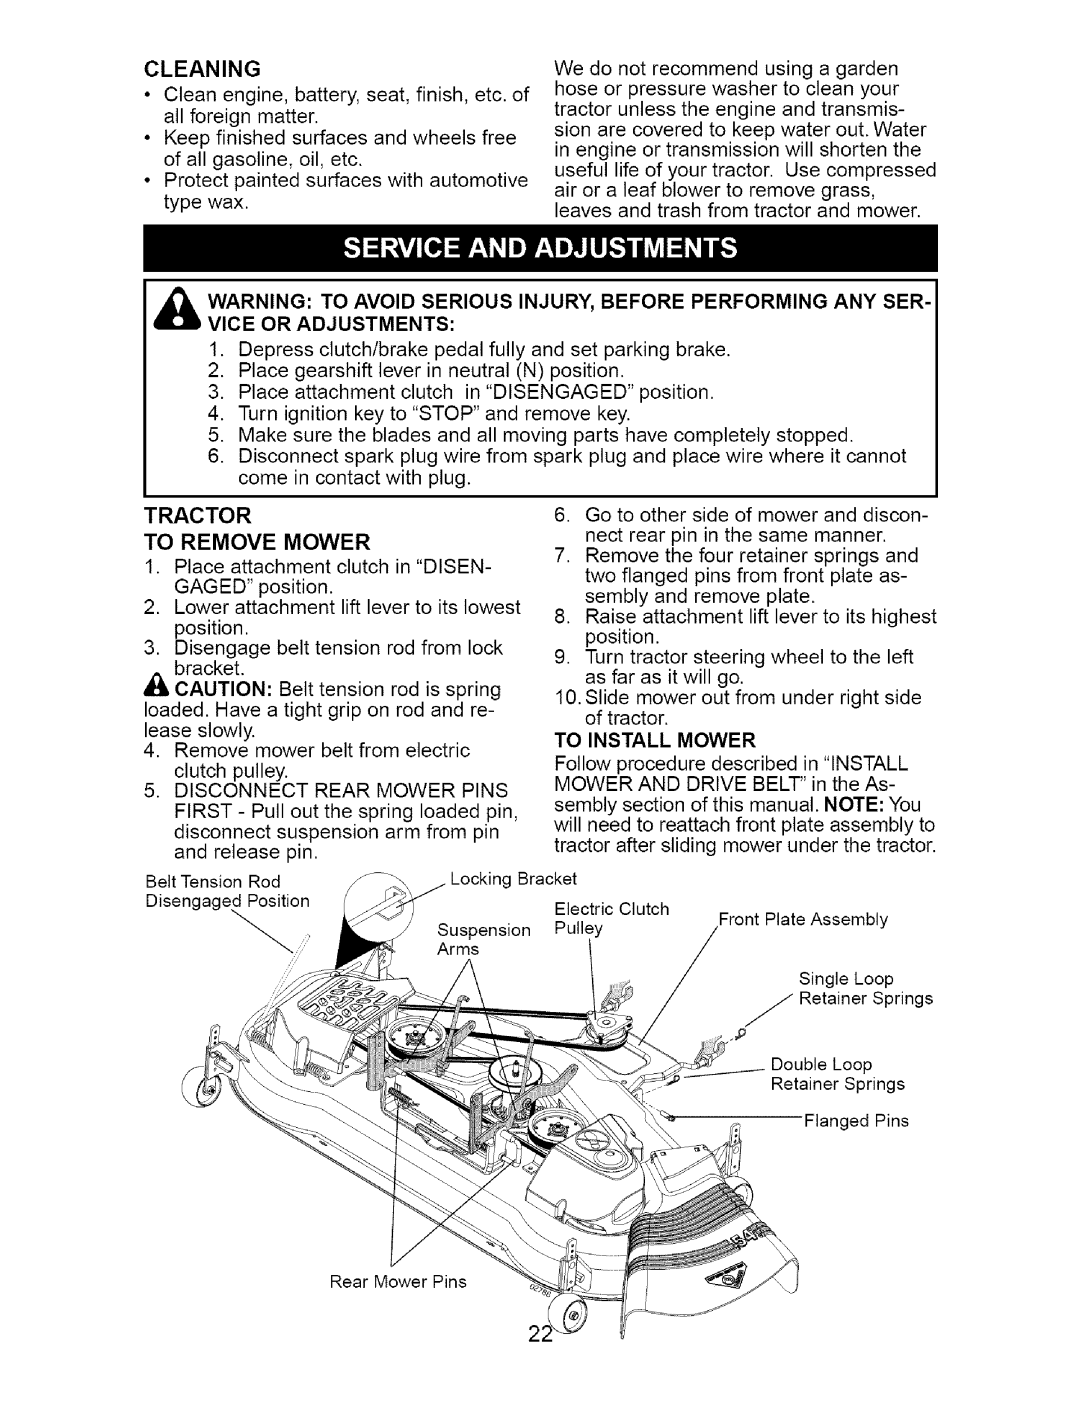 Craftsman 917.27623 owner manual Cleaning, Vice Or Adjustments, To Remove Mower, To Install Mower 